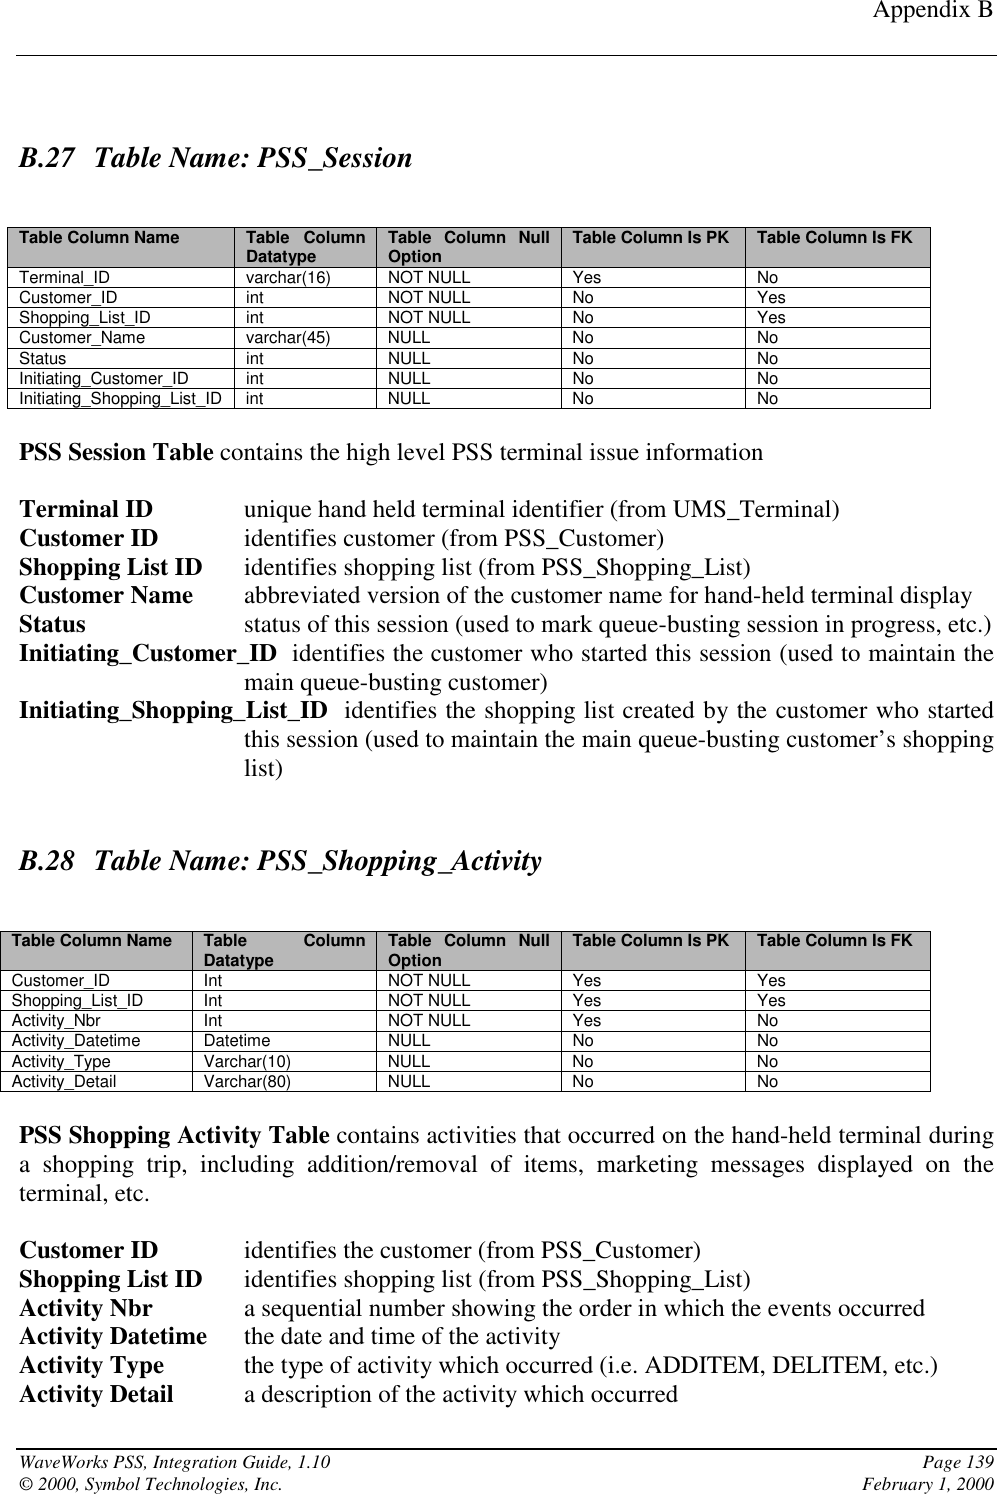 Appendix BWaveWorks PSS, Integration Guide, 1.10 Page 139© 2000, Symbol Technologies, Inc. February 1, 2000B.27 Table Name: PSS_SessionTable Column Name Table ColumnDatatype Table Column NullOption Table Column Is PK Table Column Is FKTerminal_ID varchar(16) NOT NULL Yes NoCustomer_ID int NOT NULL No YesShopping_List_ID int NOT NULL No YesCustomer_Name varchar(45) NULL No NoStatus int NULL No NoInitiating_Customer_ID int NULL No NoInitiating_Shopping_List_ID int NULL No NoPSS Session Table contains the high level PSS terminal issue informationTerminal ID unique hand held terminal identifier (from UMS_Terminal)Customer ID identifies customer (from PSS_Customer)Shopping List ID identifies shopping list (from PSS_Shopping_List)Customer Name abbreviated version of the customer name for hand-held terminal displayStatus status of this session (used to mark queue-busting session in progress, etc.)Initiating_Customer_ID  identifies the customer who started this session (used to maintain themain queue-busting customer)Initiating_Shopping_List_ID  identifies the shopping list created by the customer who startedthis session (used to maintain the main queue-busting customer’s shoppinglist)B.28 Table Name: PSS_Shopping_ActivityTable Column Name Table ColumnDatatype Table Column NullOption Table Column Is PK Table Column Is FKCustomer_ID Int NOT NULL Yes YesShopping_List_ID Int NOT NULL Yes YesActivity_Nbr Int NOT NULL Yes NoActivity_Datetime Datetime NULL No NoActivity_Type Varchar(10) NULL No NoActivity_Detail Varchar(80) NULL No NoPSS Shopping Activity Table contains activities that occurred on the hand-held terminal duringa shopping trip, including addition/removal of items, marketing messages displayed on theterminal, etc.Customer ID identifies the customer (from PSS_Customer)Shopping List ID identifies shopping list (from PSS_Shopping_List)Activity Nbr a sequential number showing the order in which the events occurredActivity Datetime the date and time of the activityActivity Type the type of activity which occurred (i.e. ADDITEM, DELITEM, etc.)Activity Detail a description of the activity which occurred